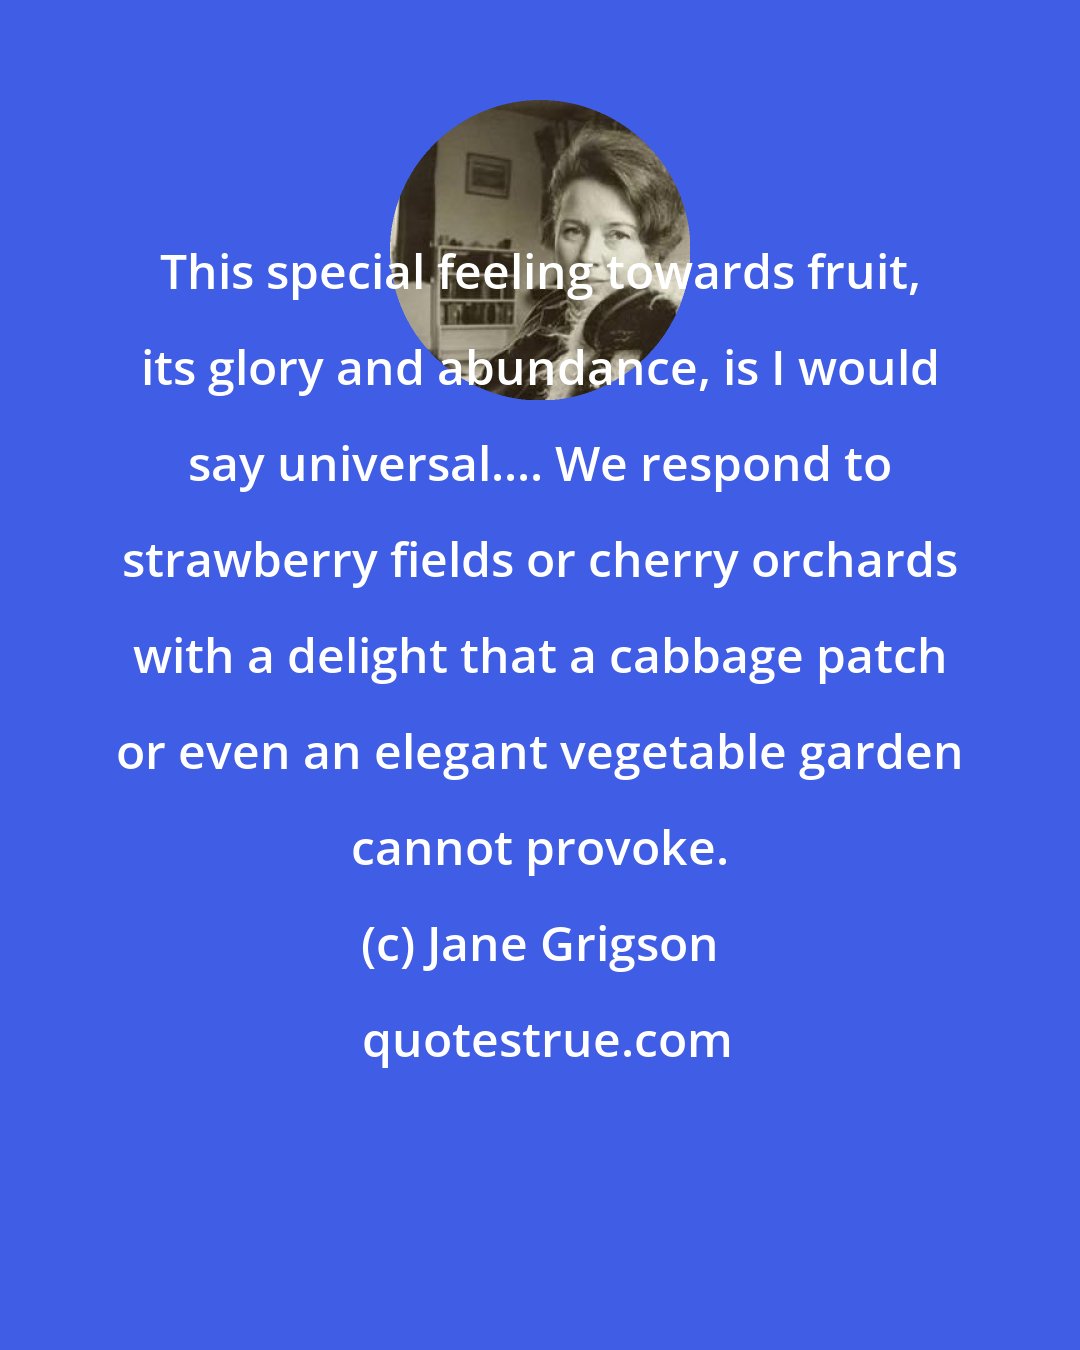 Jane Grigson: This special feeling towards fruit, its glory and abundance, is I would say universal.... We respond to strawberry fields or cherry orchards with a delight that a cabbage patch or even an elegant vegetable garden cannot provoke.